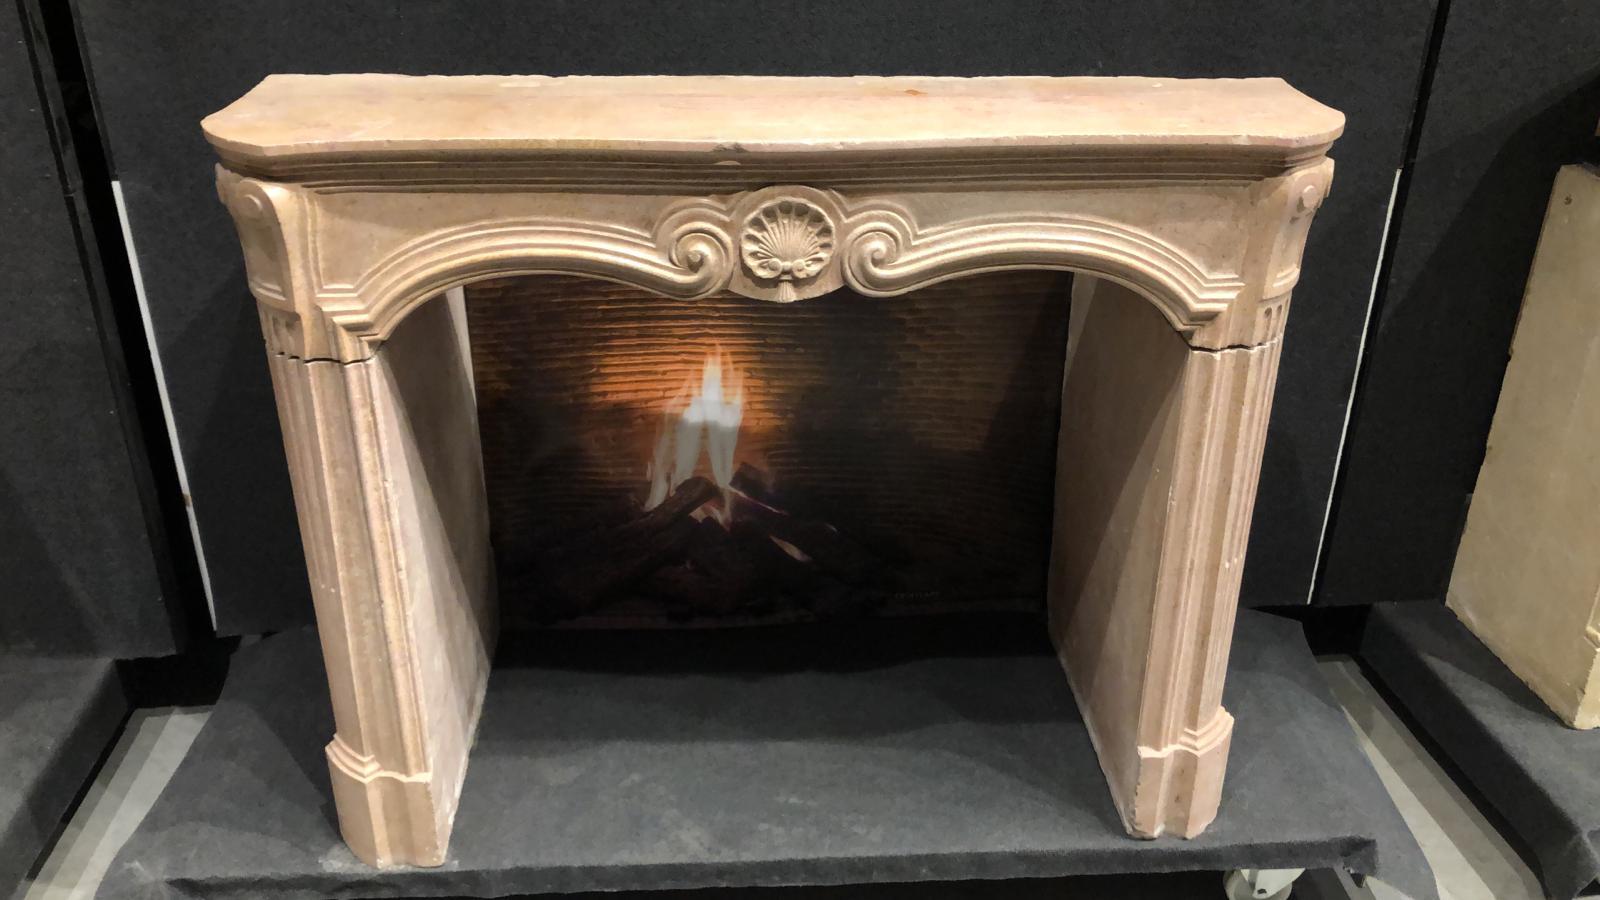 Beautiful colored marmer stone fireplace mantel with carving of exceptional quality. The stone has a warm, honey-colored hue and will look stunning in any room.

If you are looking for the perfect piece to complement your cozy interior, this